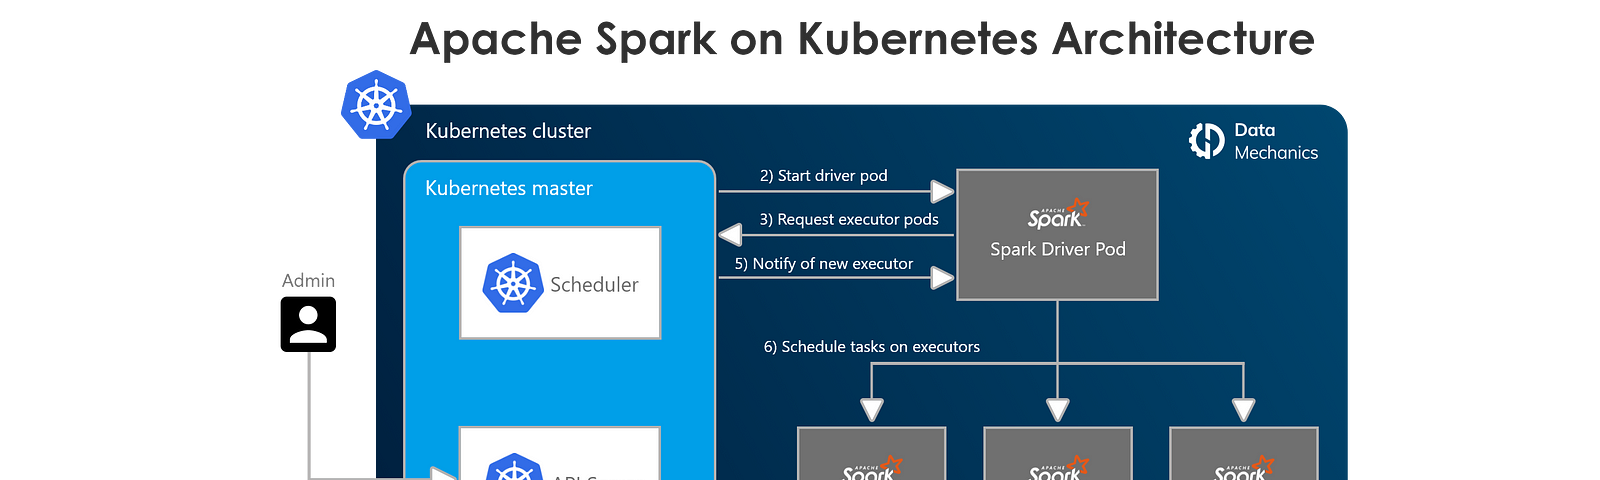 Apache Spark on Kubernetes Reference Architecture. Image by Author.